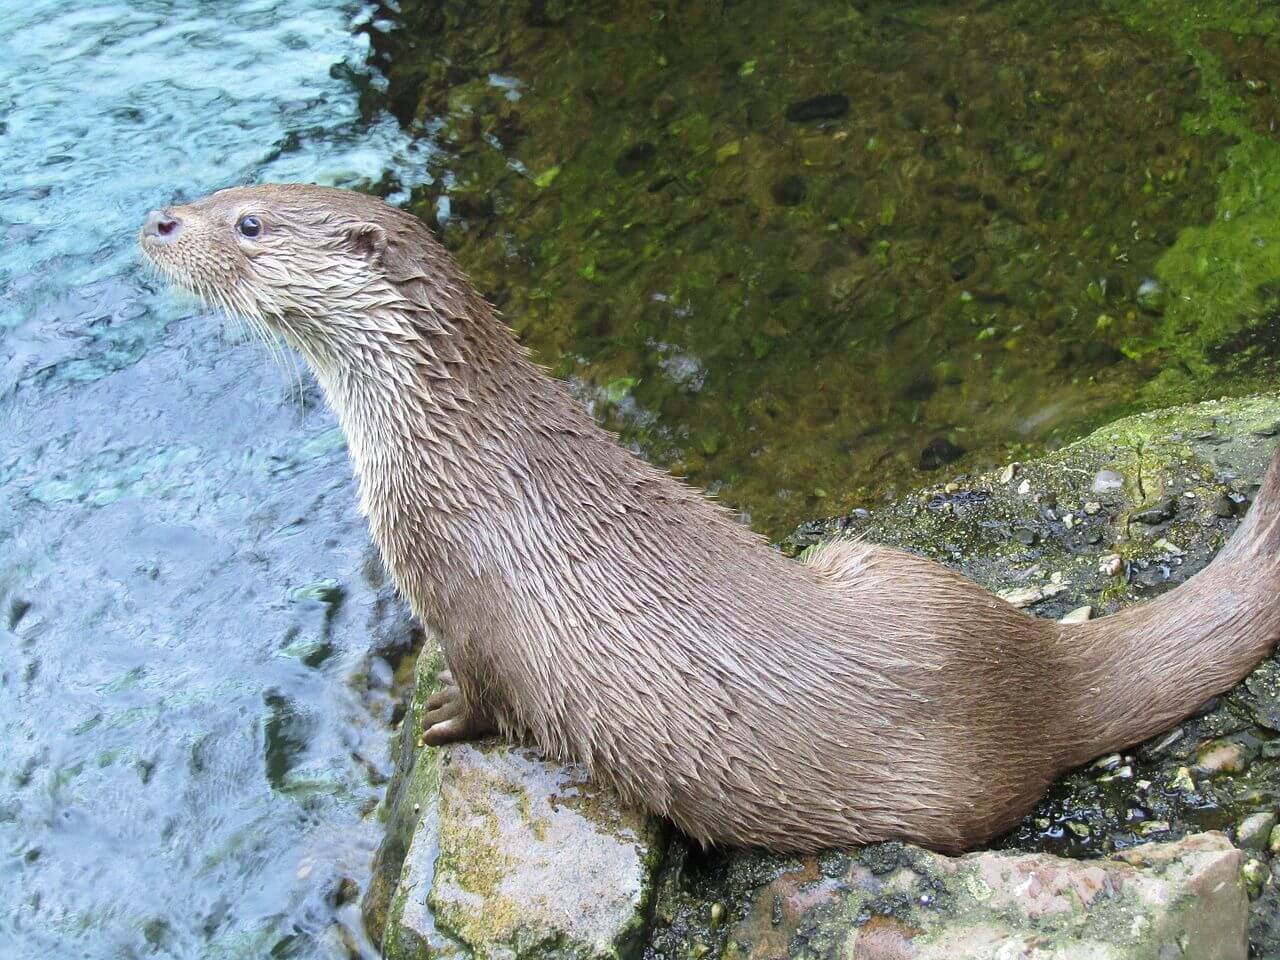 A European river otter on the edge of the water.